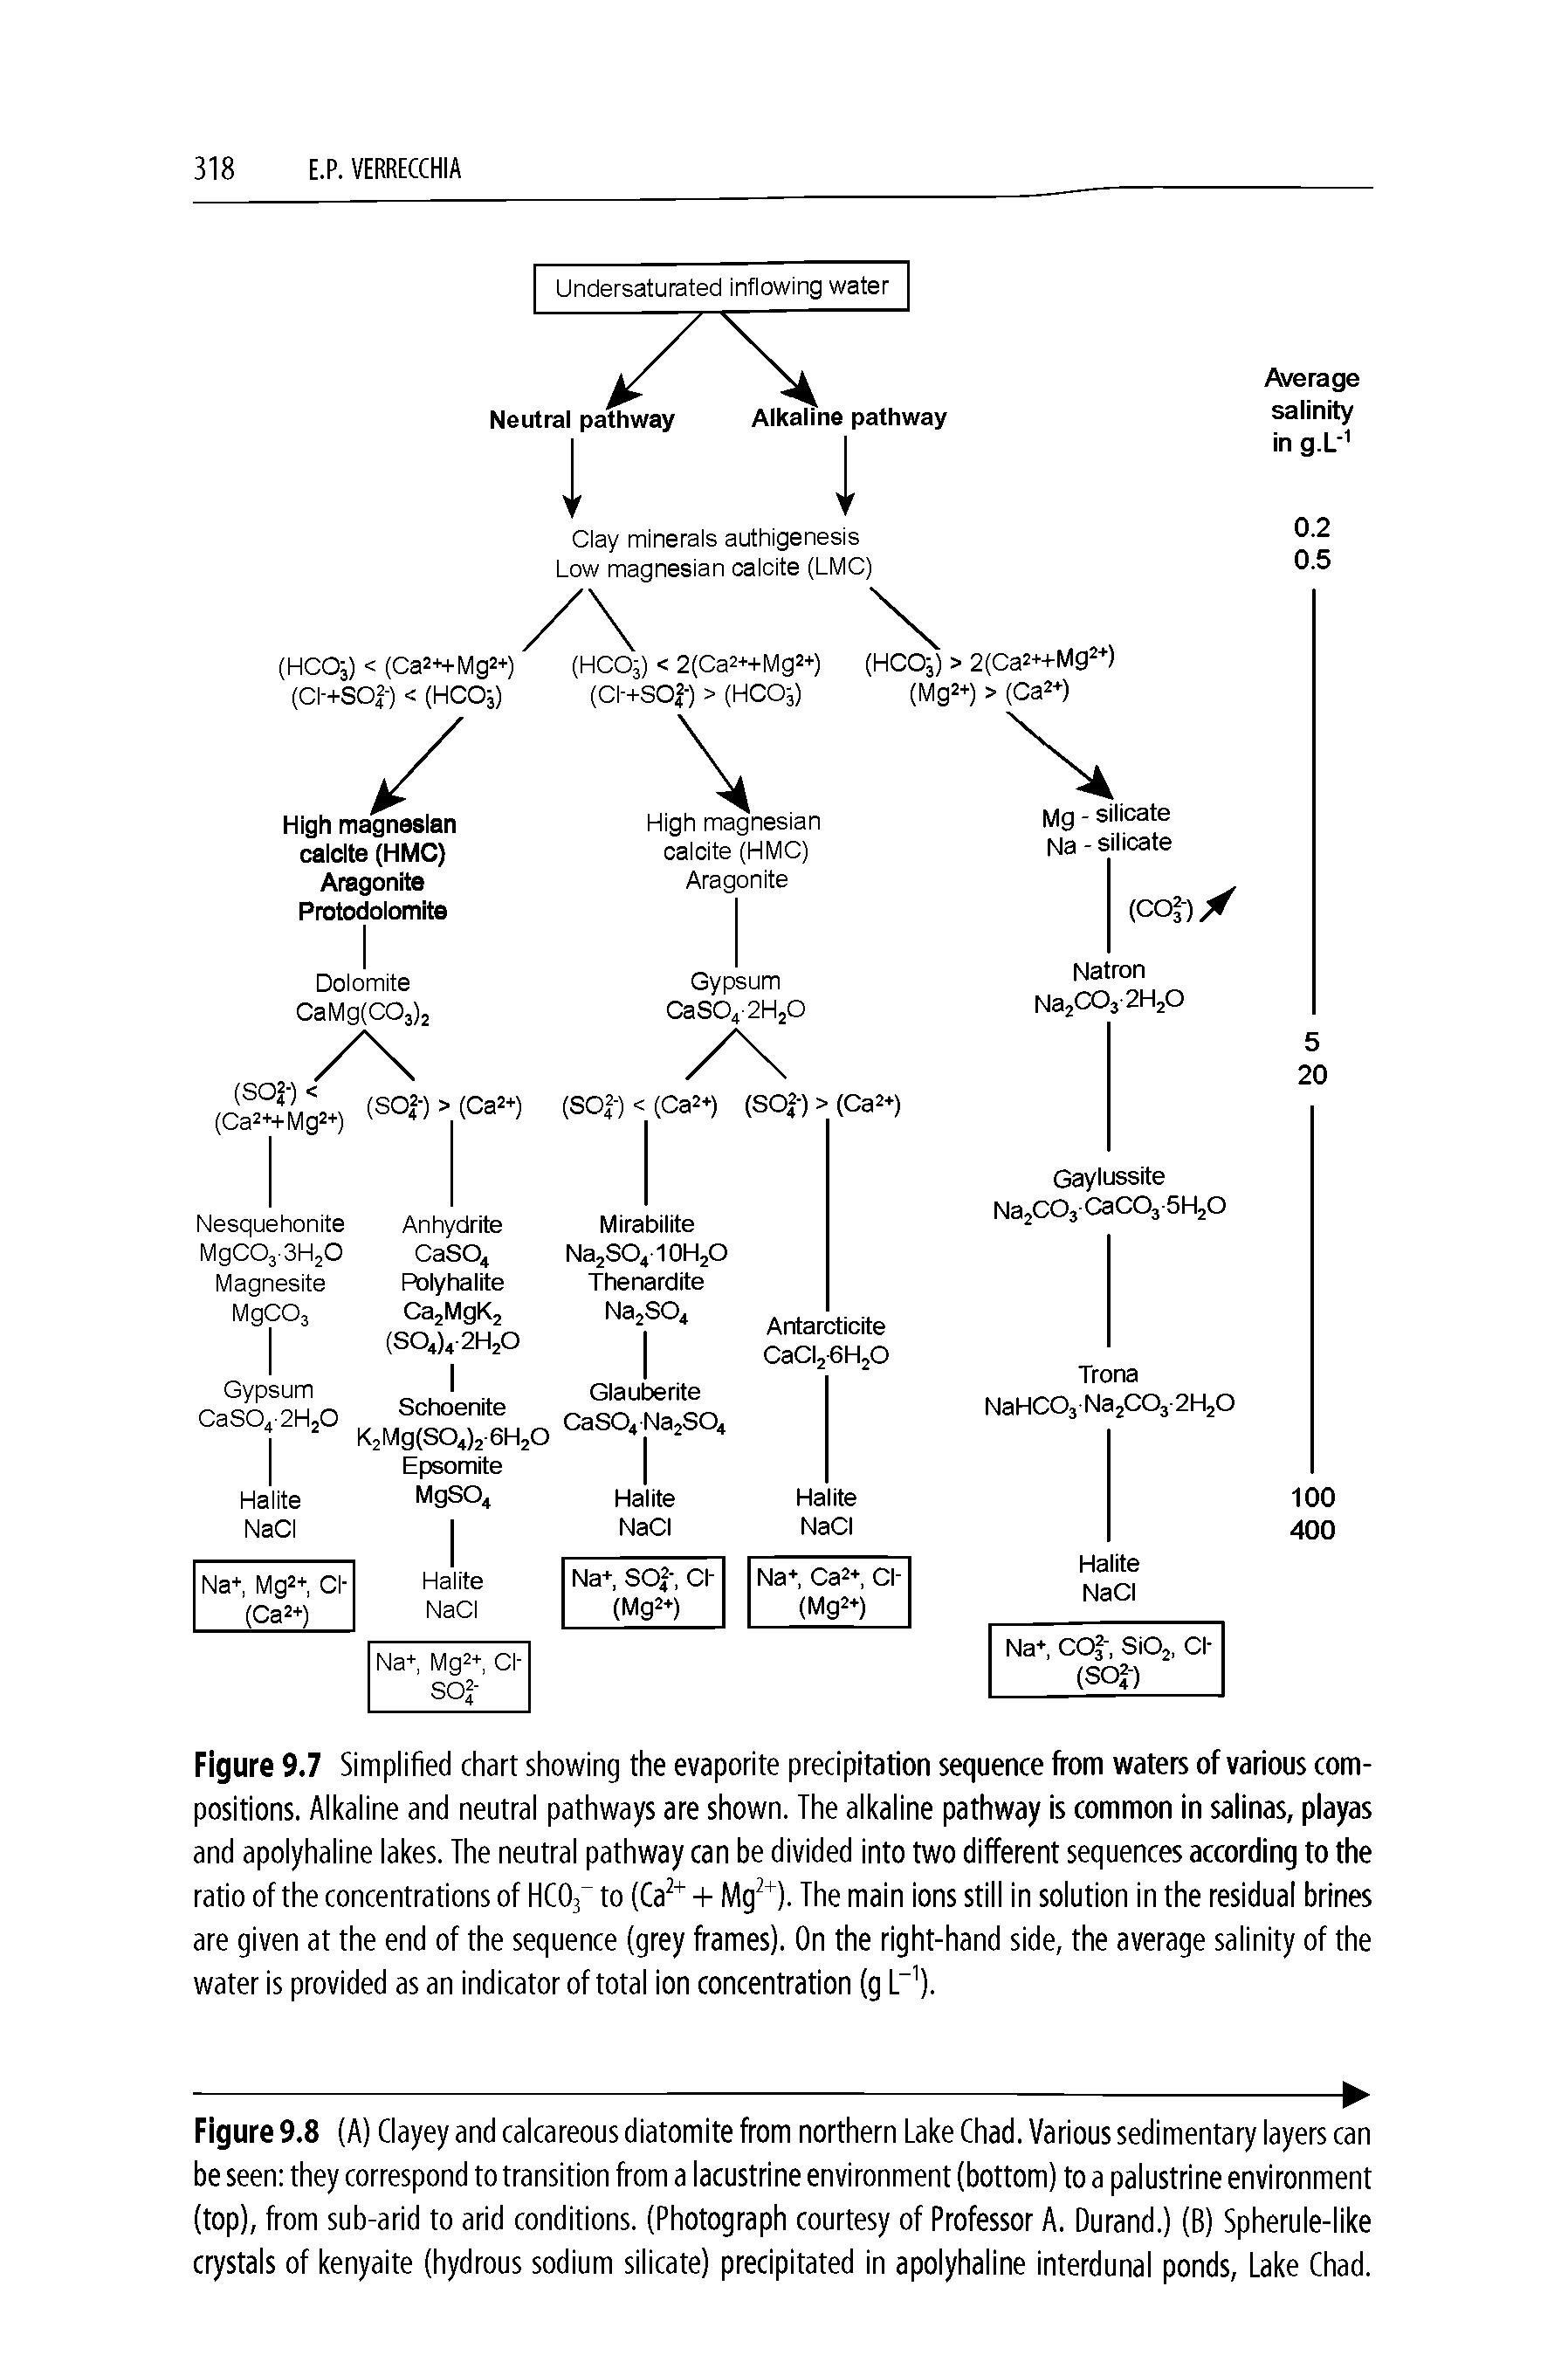 Figure 9.7 Simplified chart showing the evaporite precipitation sequence from waters of various compositions. Alkaline and neutral pathways are shown. The alkaline pathway is common in salinas, playas and apolyhaline lakes. The neutral pathway can be divided into two different sequences according to the ratio of the concentrations of HC03 to (Ca2+ + Mg2+). The main ions still in solution in the residual brines are given at the end of the sequence (grey frames). On the right-hand side, the average salinity of the water is provided as an indicator of total ion concentration (g L-1).